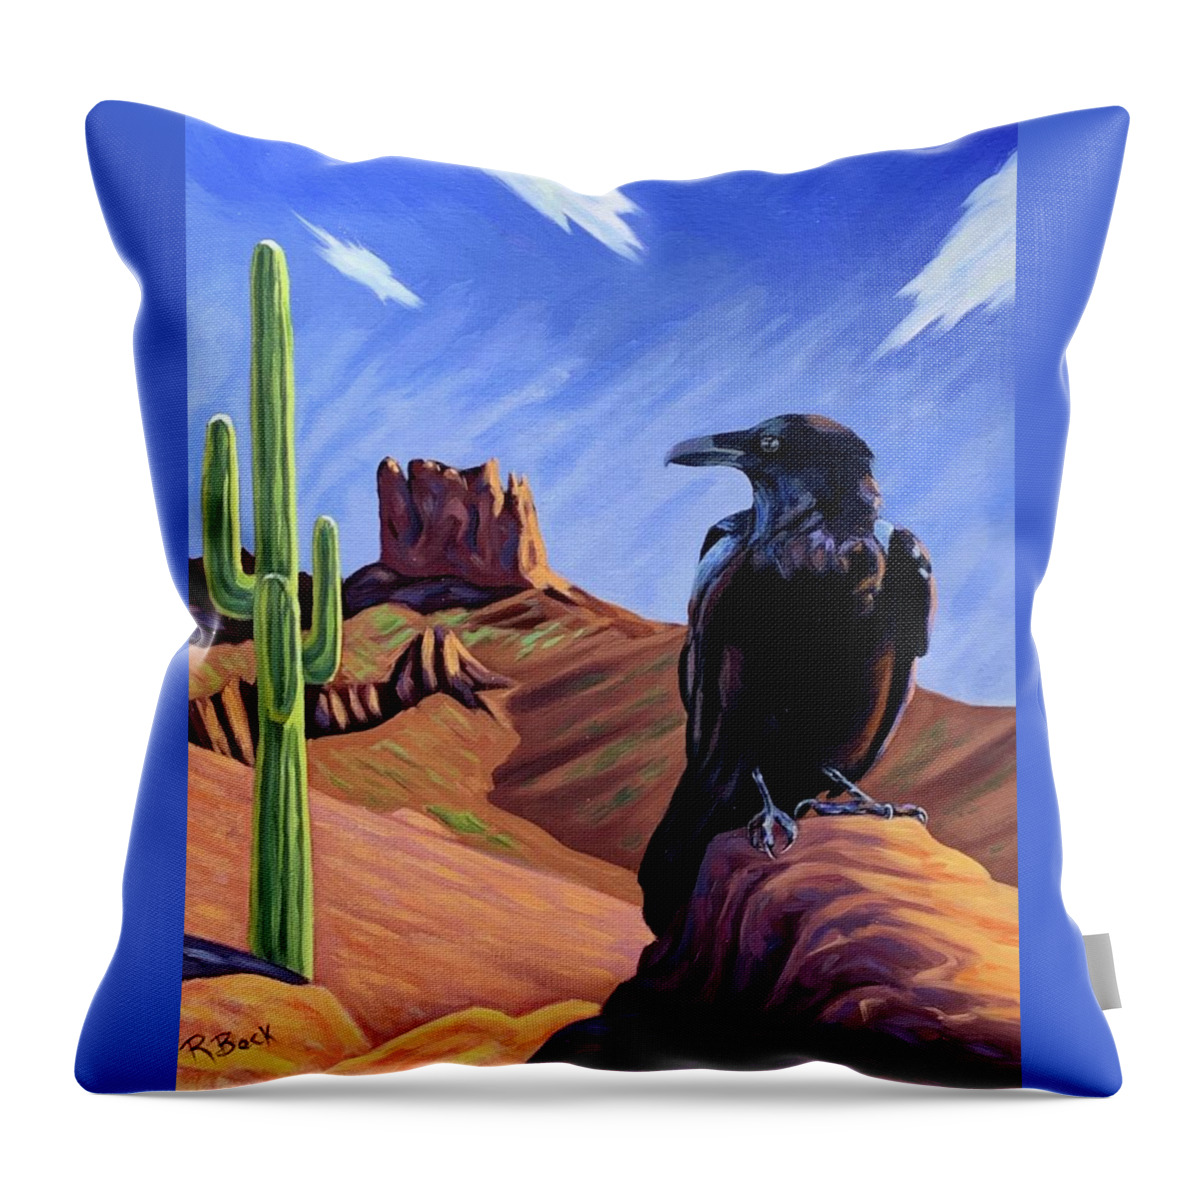 Raven Throw Pillow featuring the painting Robber's Rest by Rachel Suzanne Beck